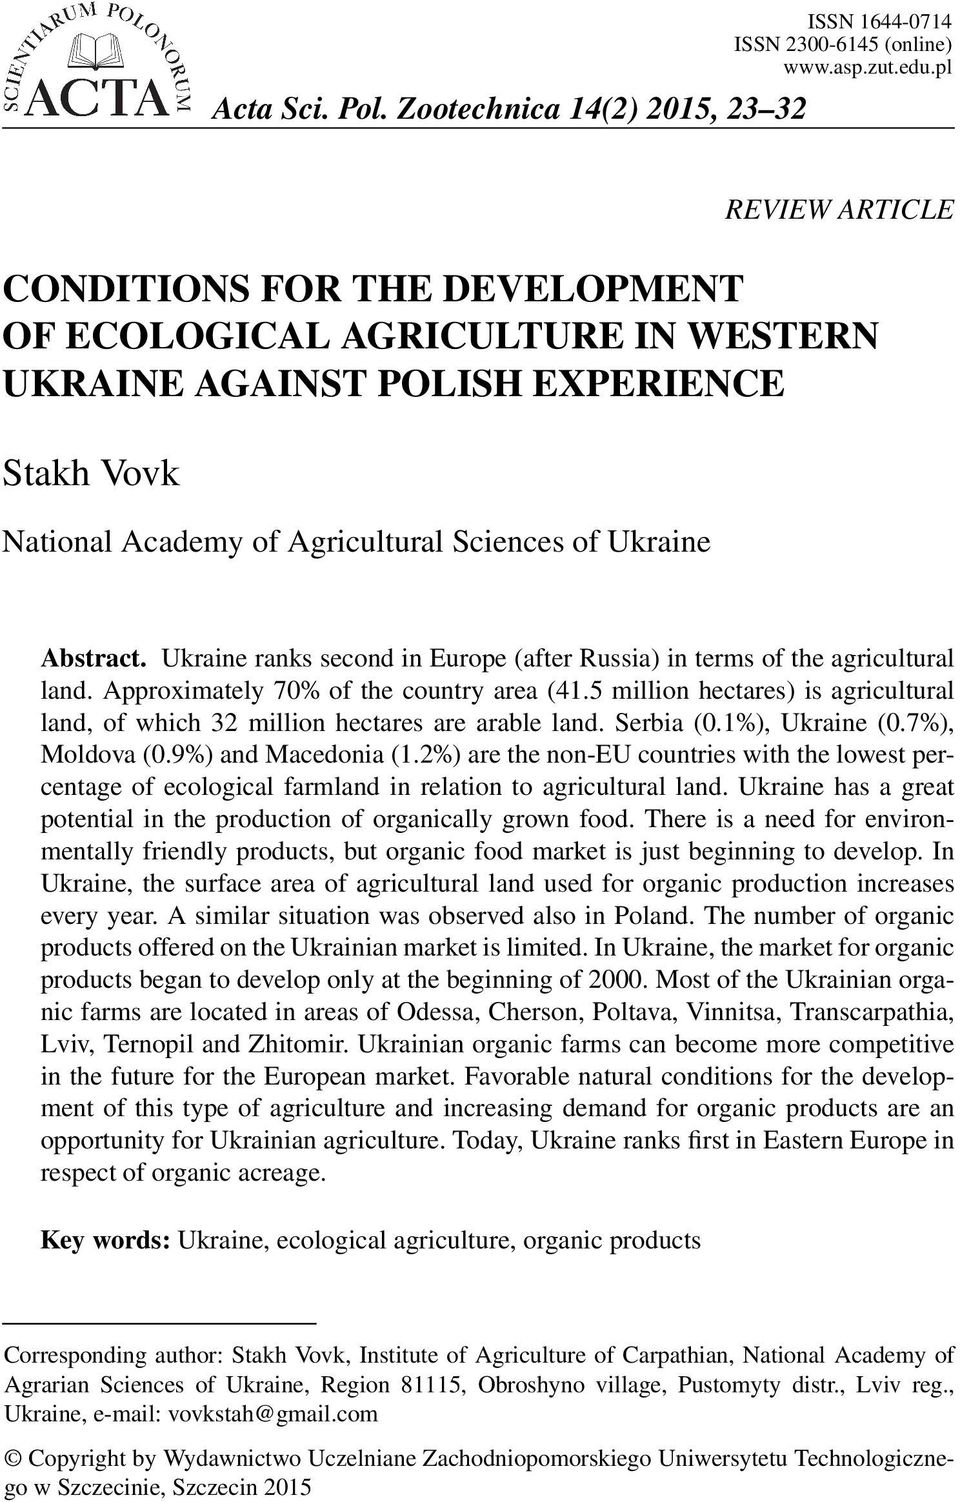 Ukraine ranks second in Europe (after Russia) in terms of the agricultural land. Approximately 70% of the country area (41.